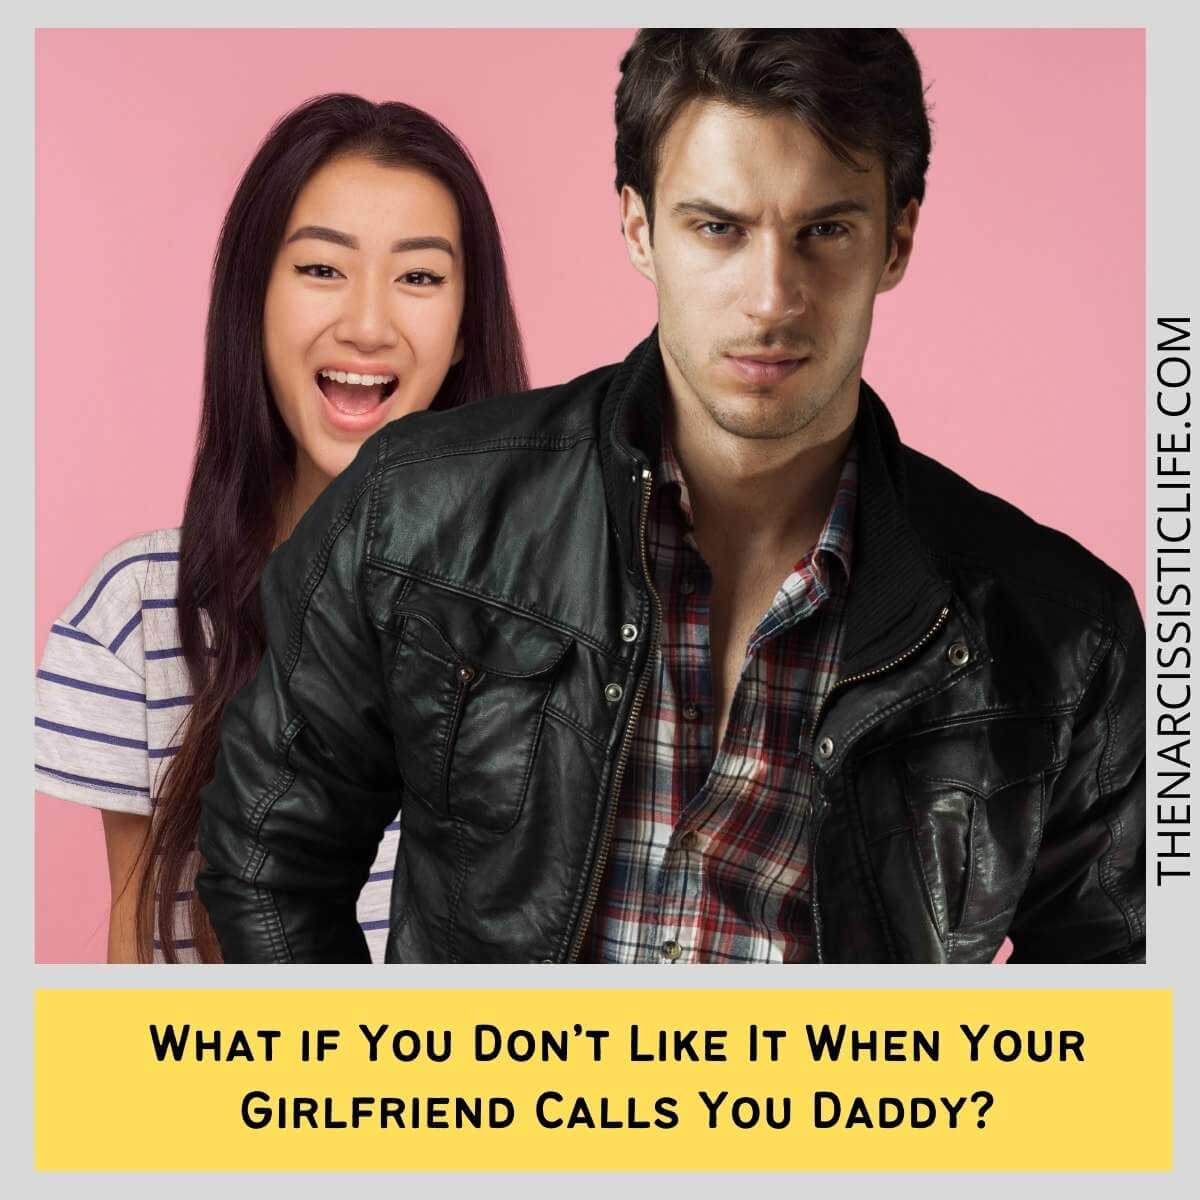 What Does It Mean When She Calls You Daddy? photo